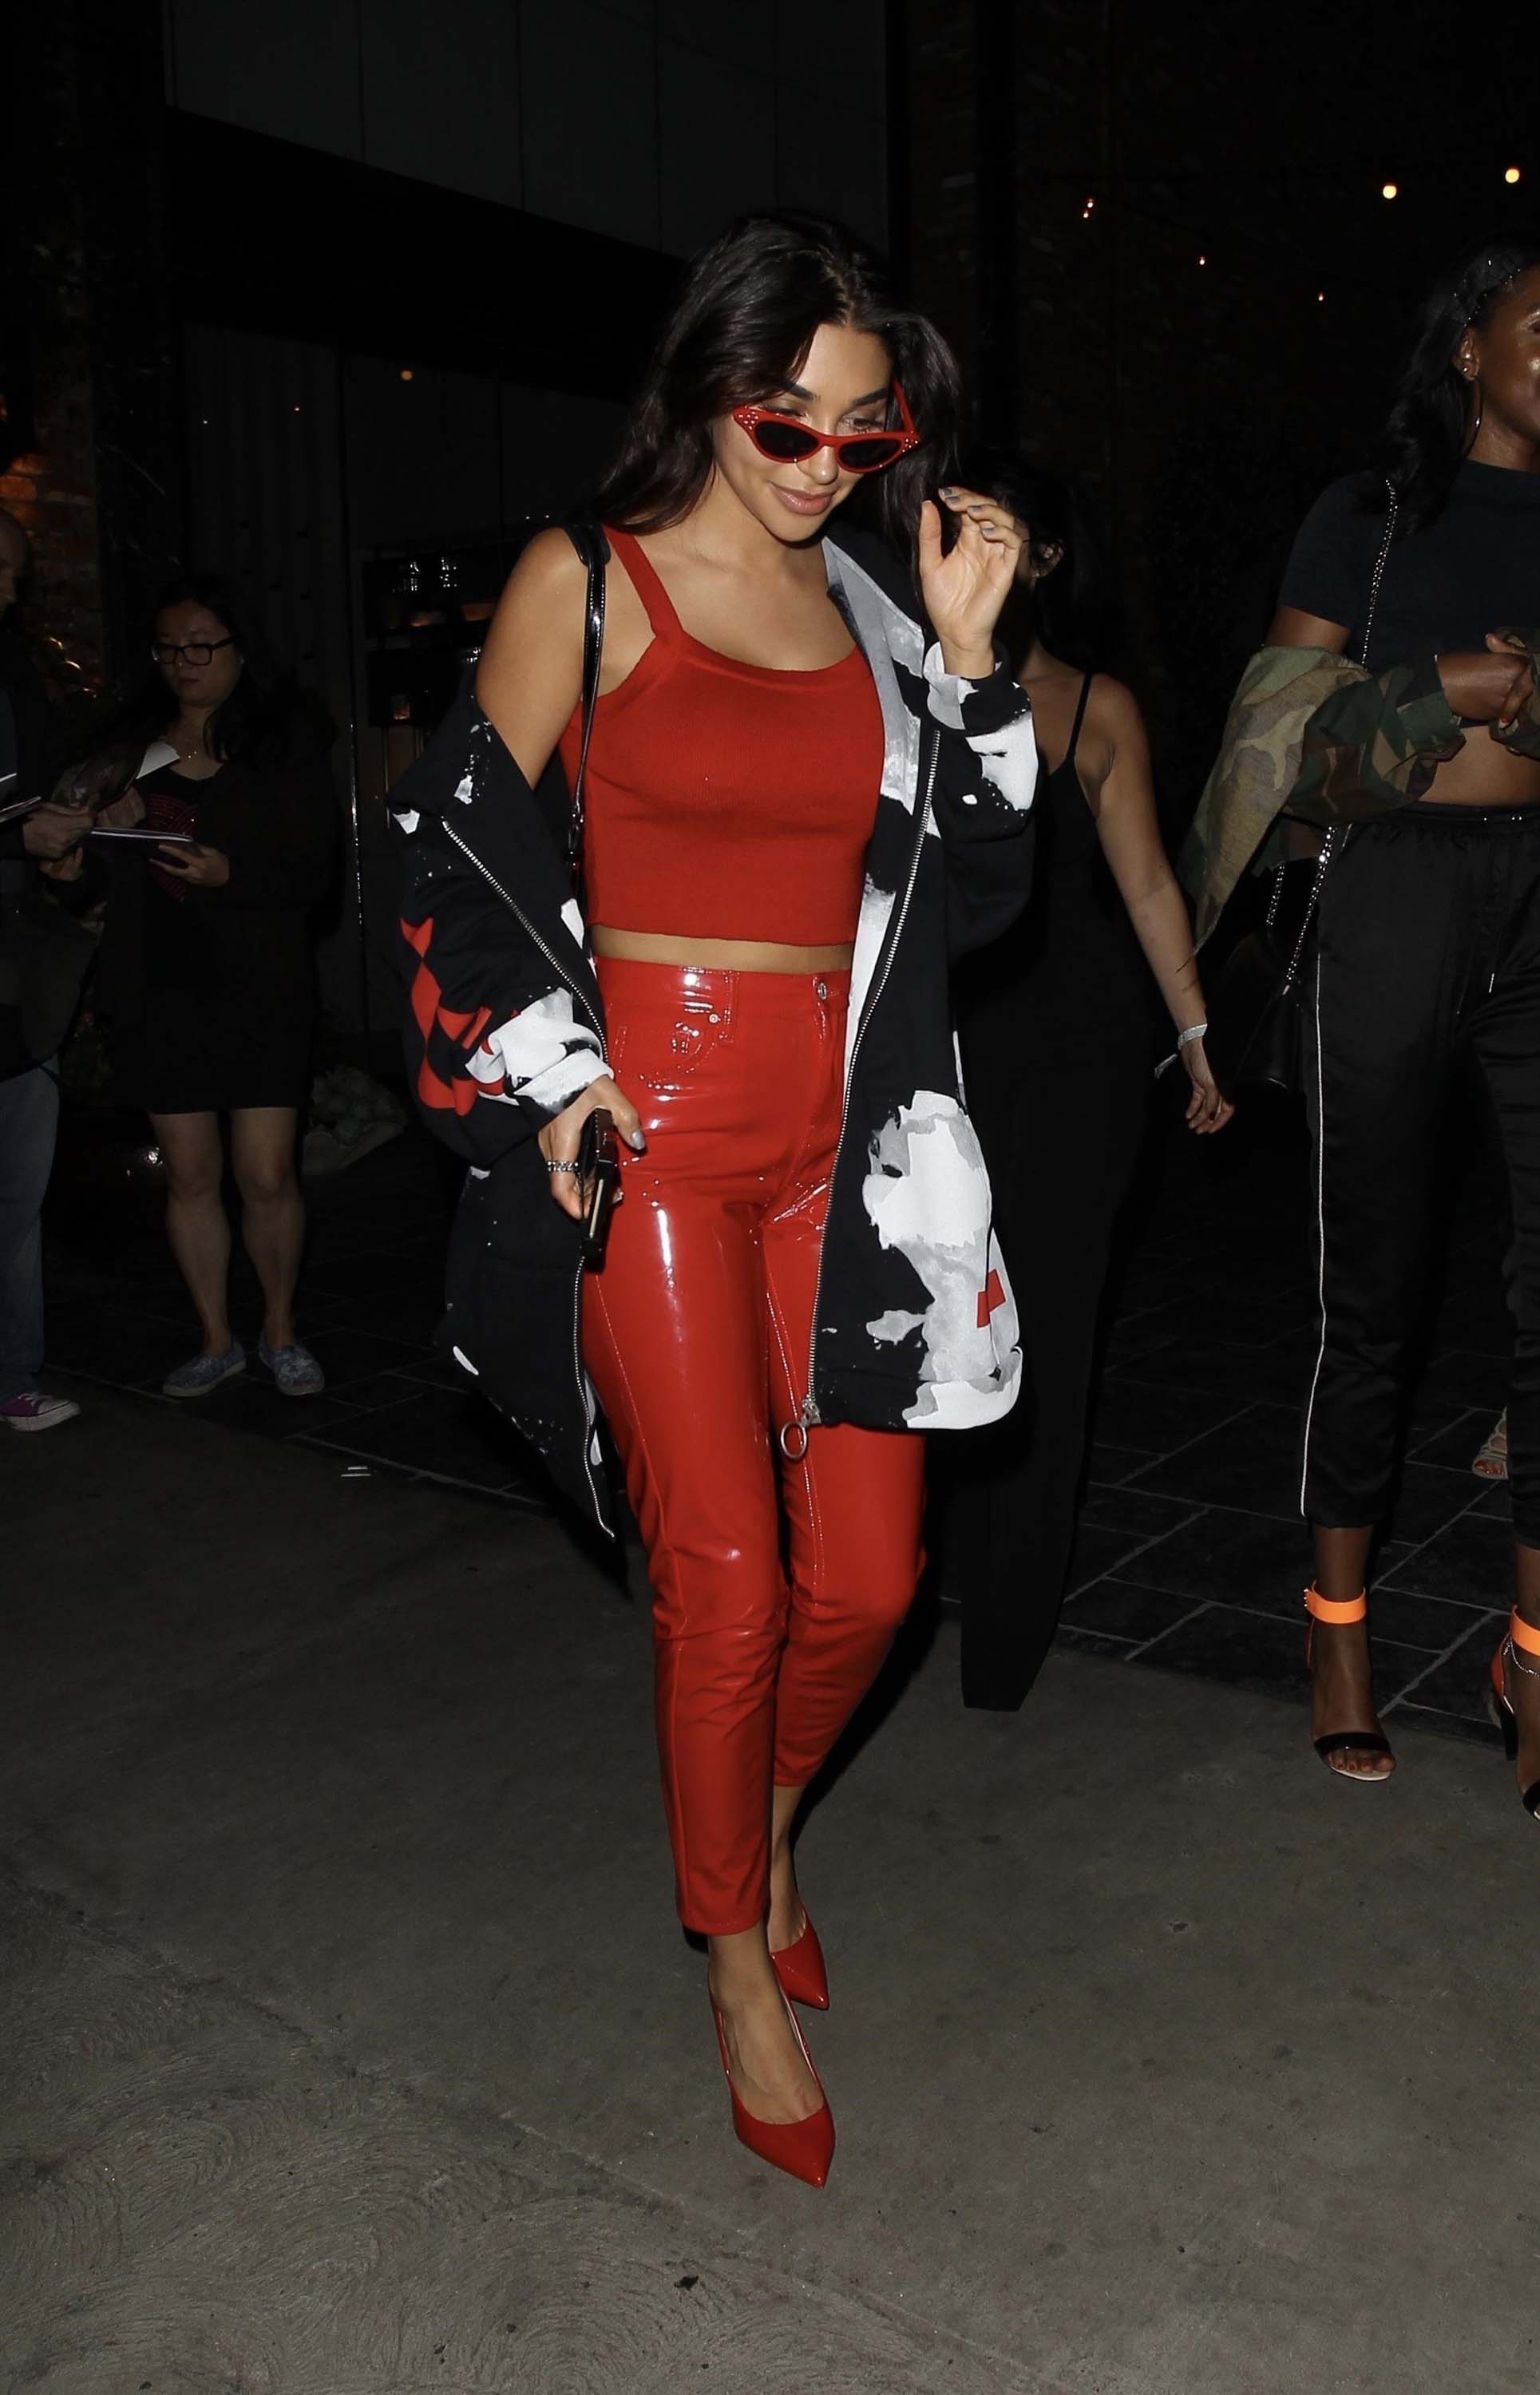 Chantel Jeffries smiles and poses for photos in a red hot form fitting outfit